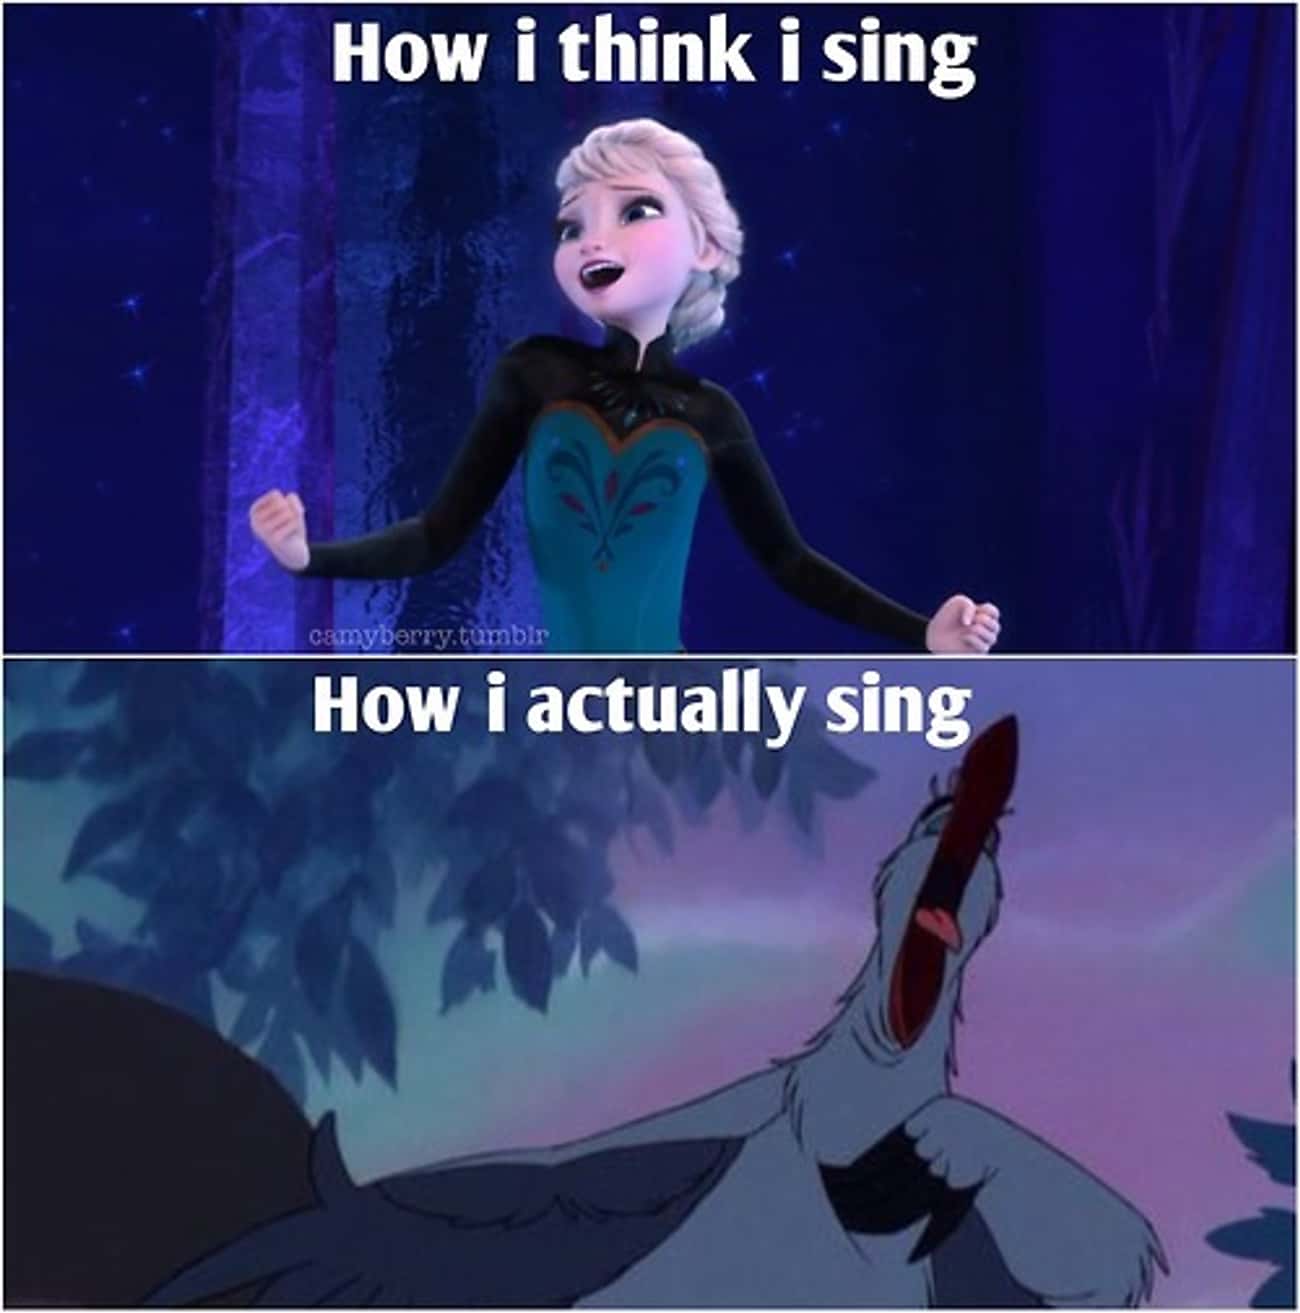 That's why it's better to sing in a bathroom